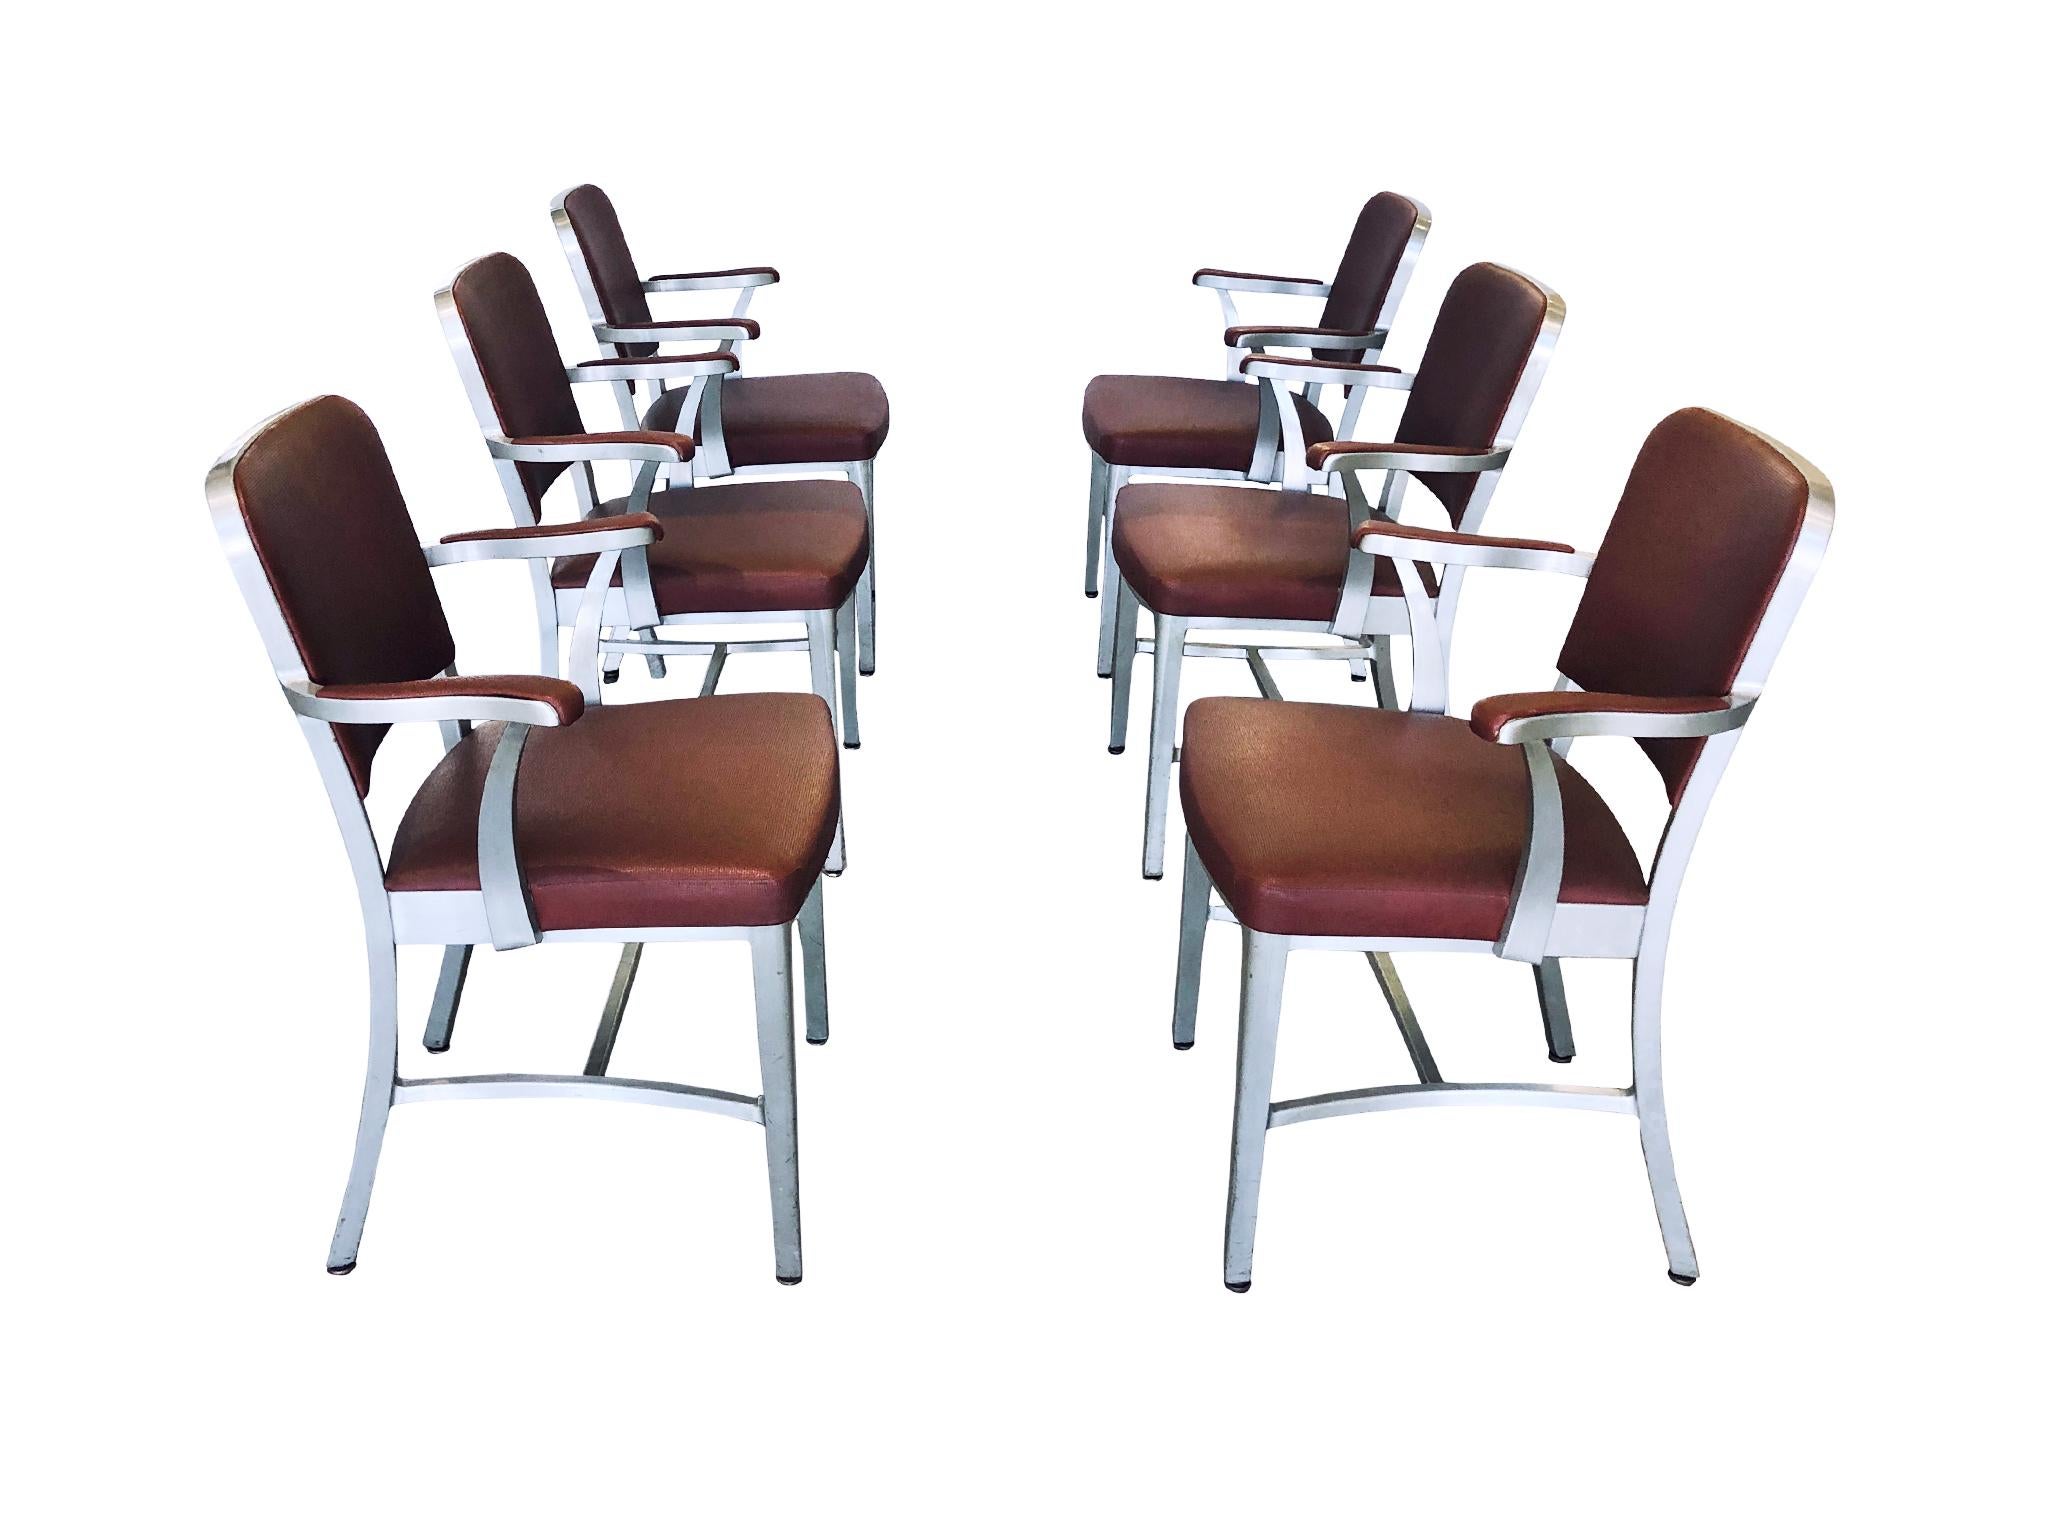 A set of Classic midcentury 6 armchairs manufactured by The General Fireproofing Co. for its line of GoodForm furniture. The chairs are comprised of an aluminum frame and textured vinyl upholstery in maroon. The design of these chairs is simple and